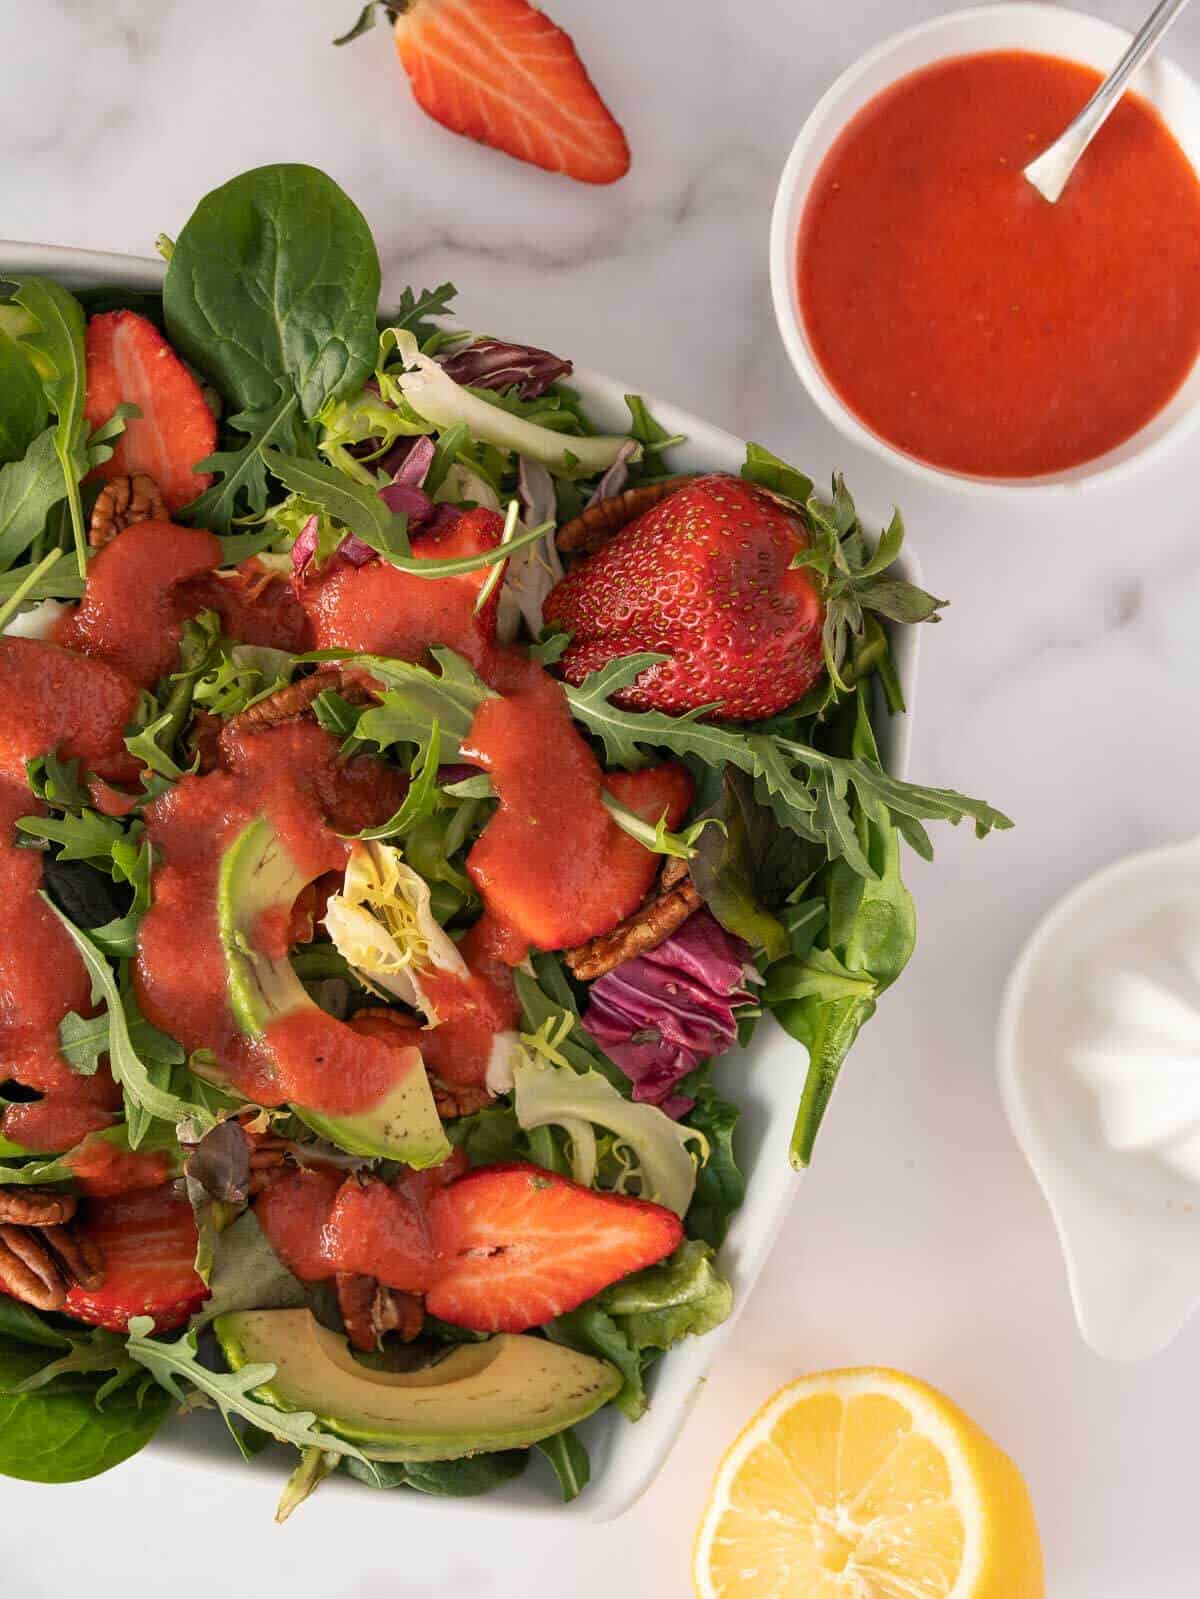 creamy strawberry balsamic dressing over a spinach and arugula salad.